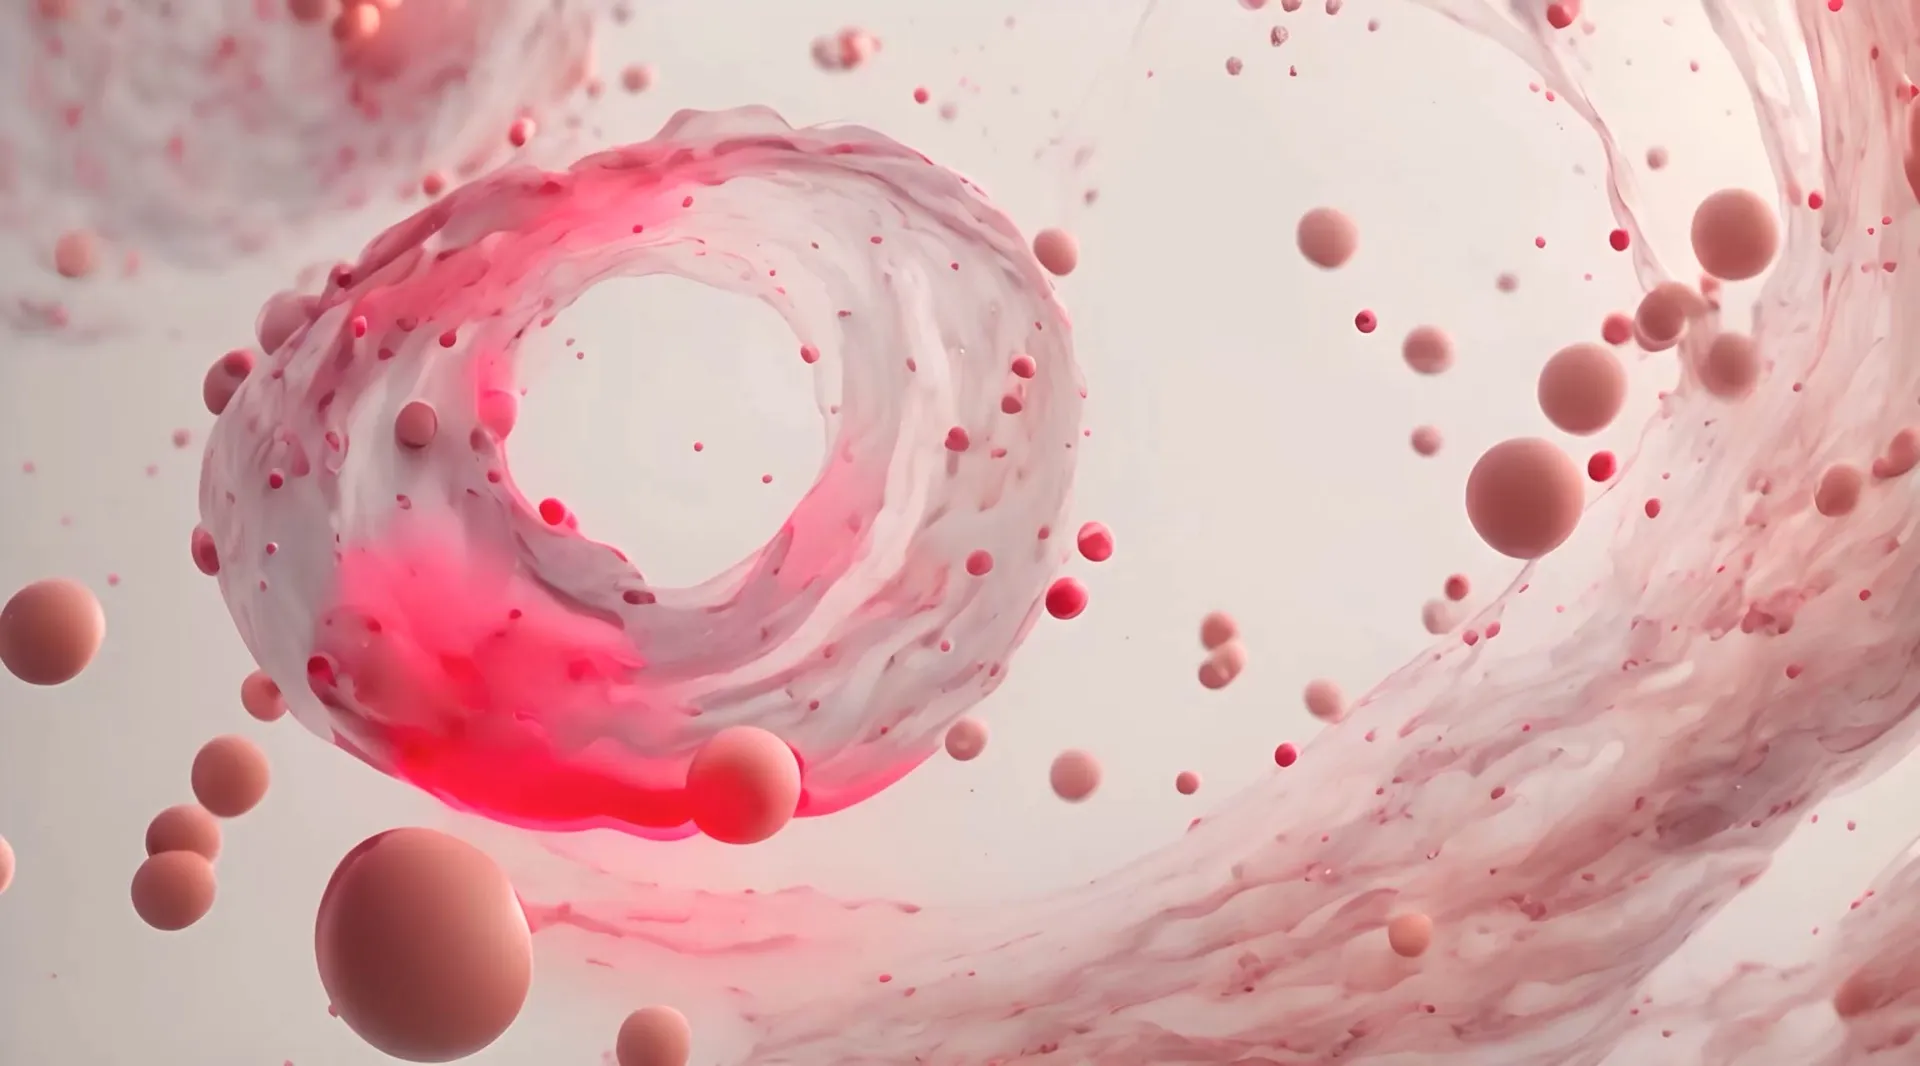 Dynamic Soft Spheres and Fluid Video